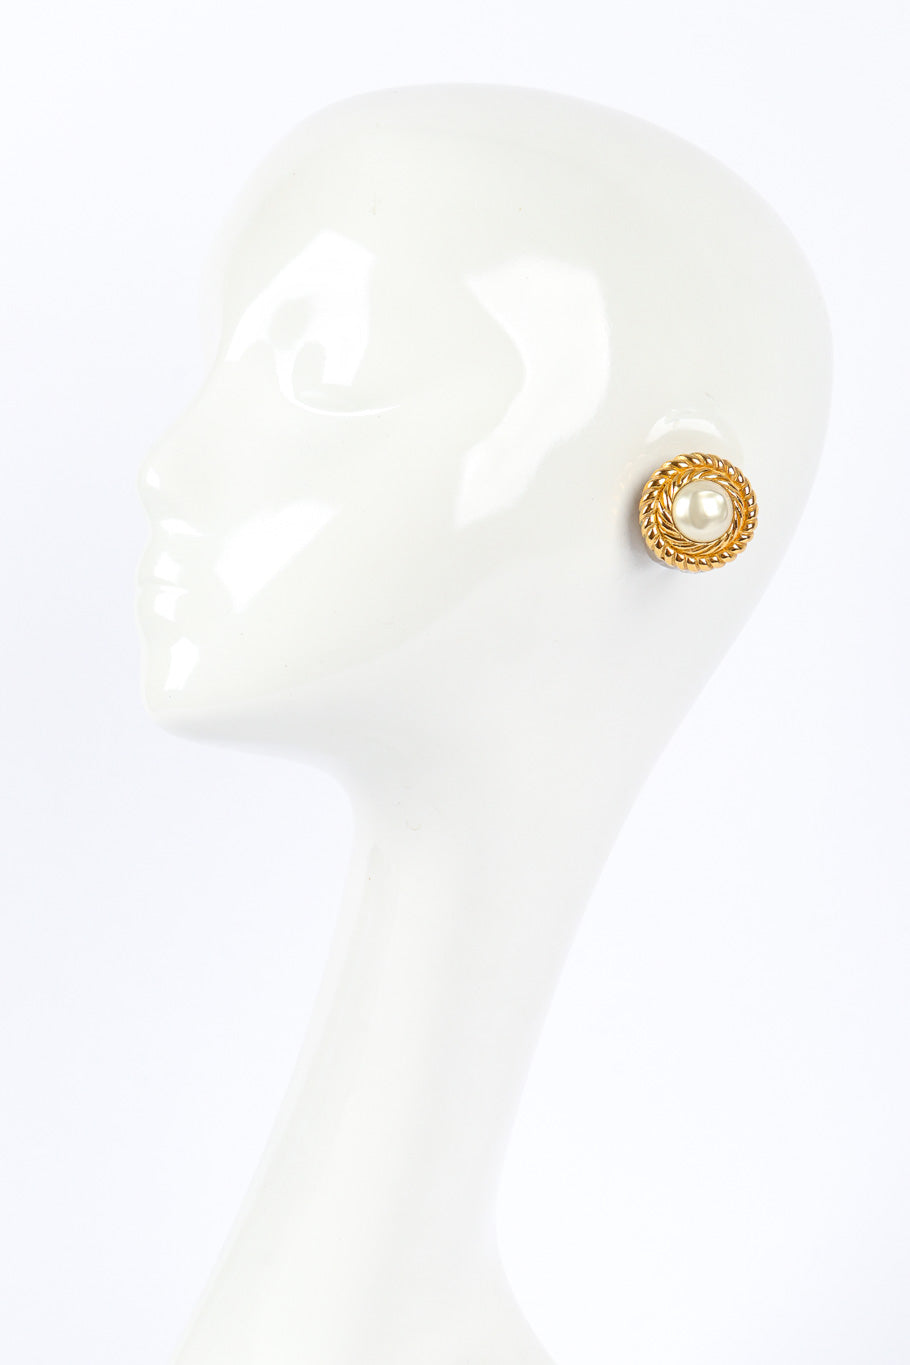 Rope Frame Pearl Earrings by Chanel on white background on mannequin head @recessla